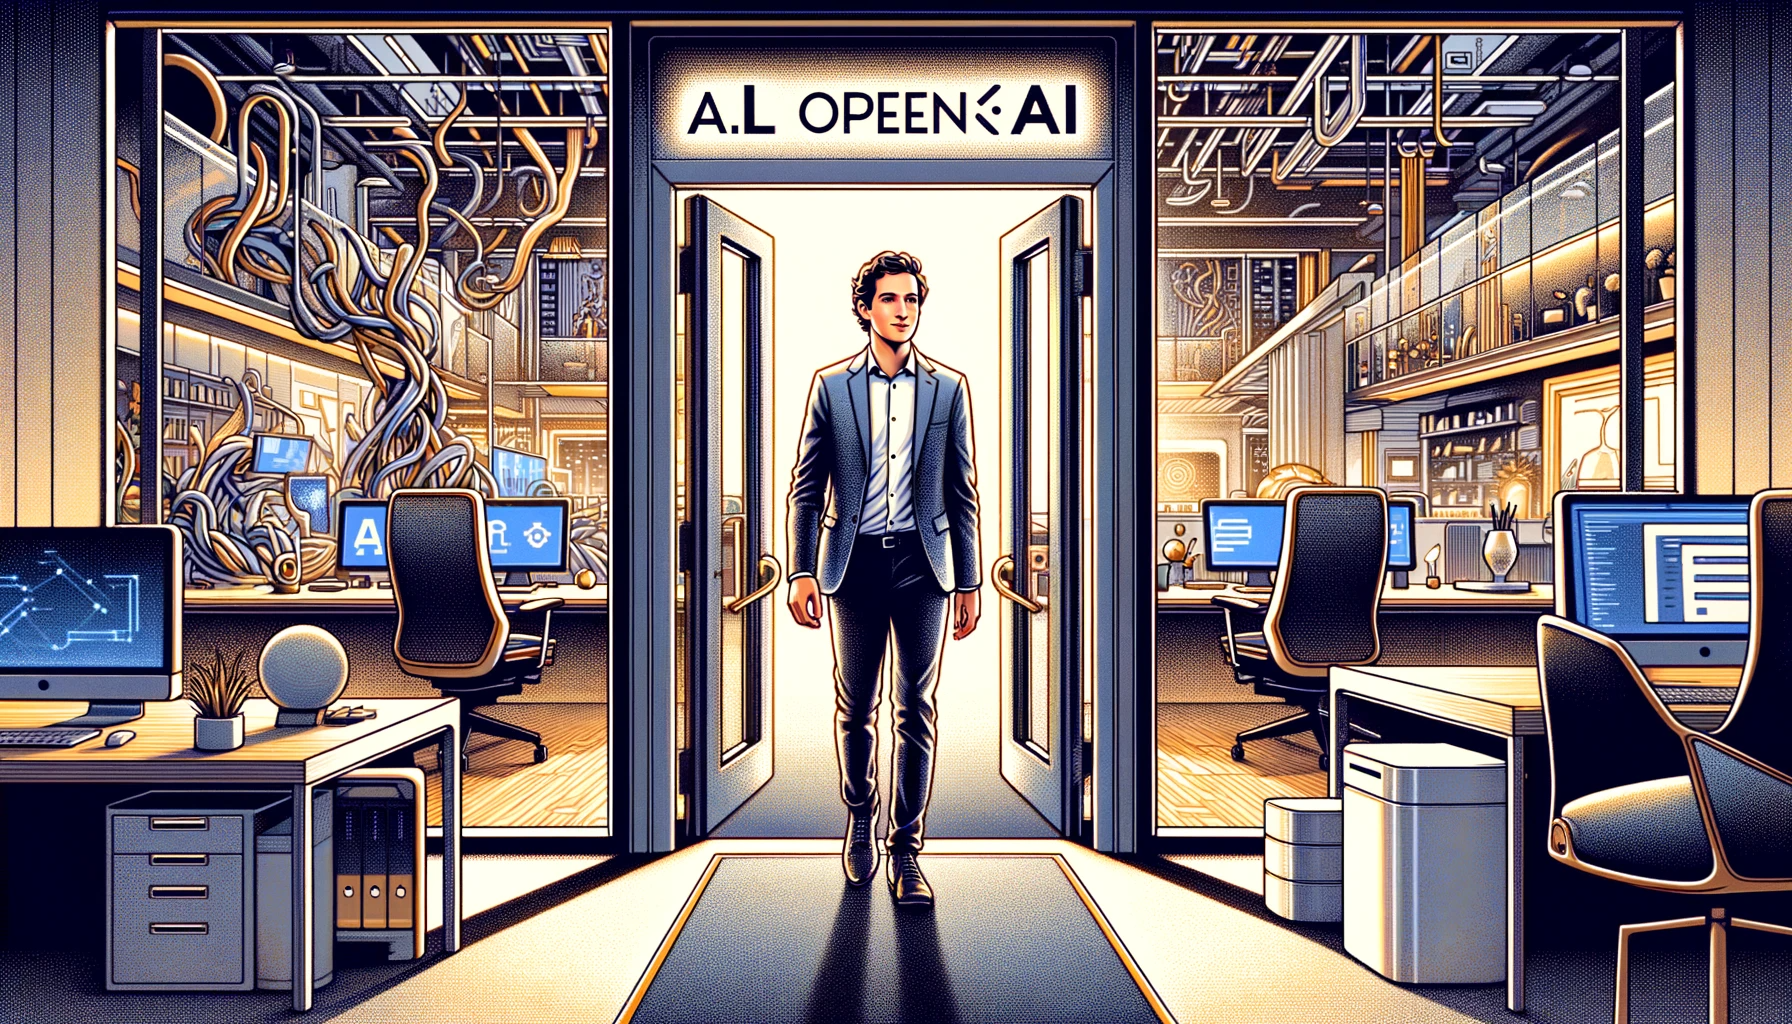 DALL·E 2023-11-27 09.17.29 - An illustration of Sam Altman, CEO of OpenAI, returning to the company, depicted as a metaphor with him walking through a doorway into an office fille.png